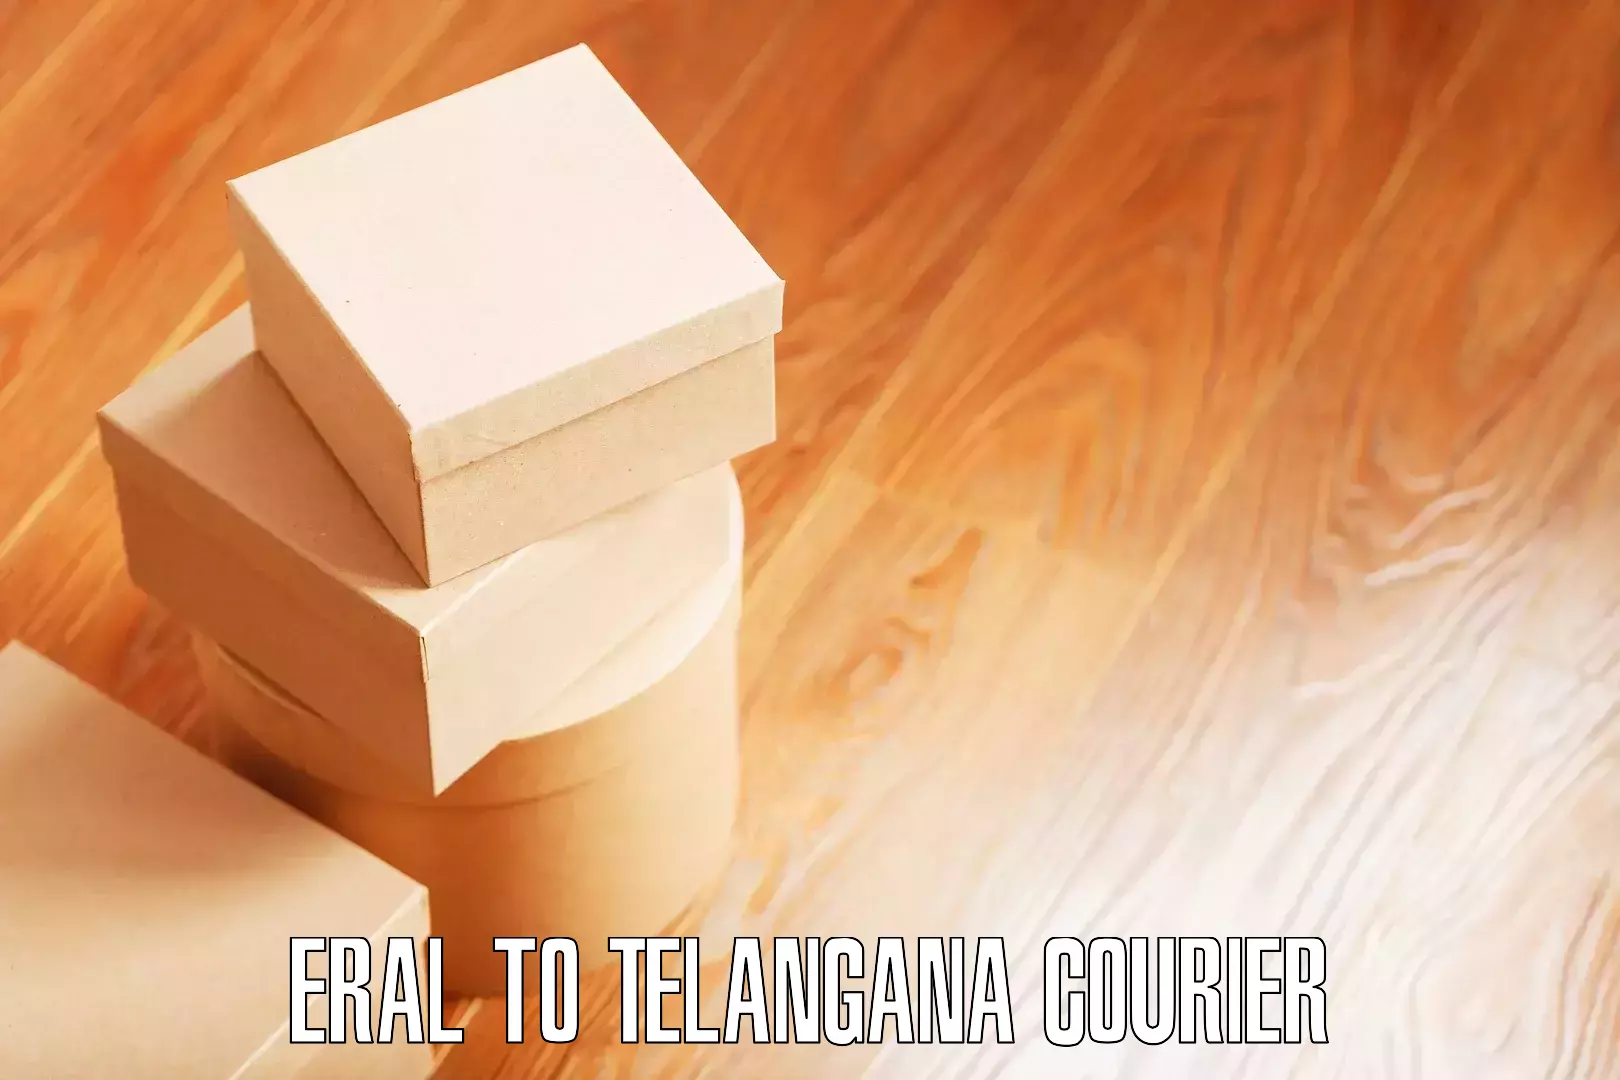 Affordable relocation services Eral to Gangadhara